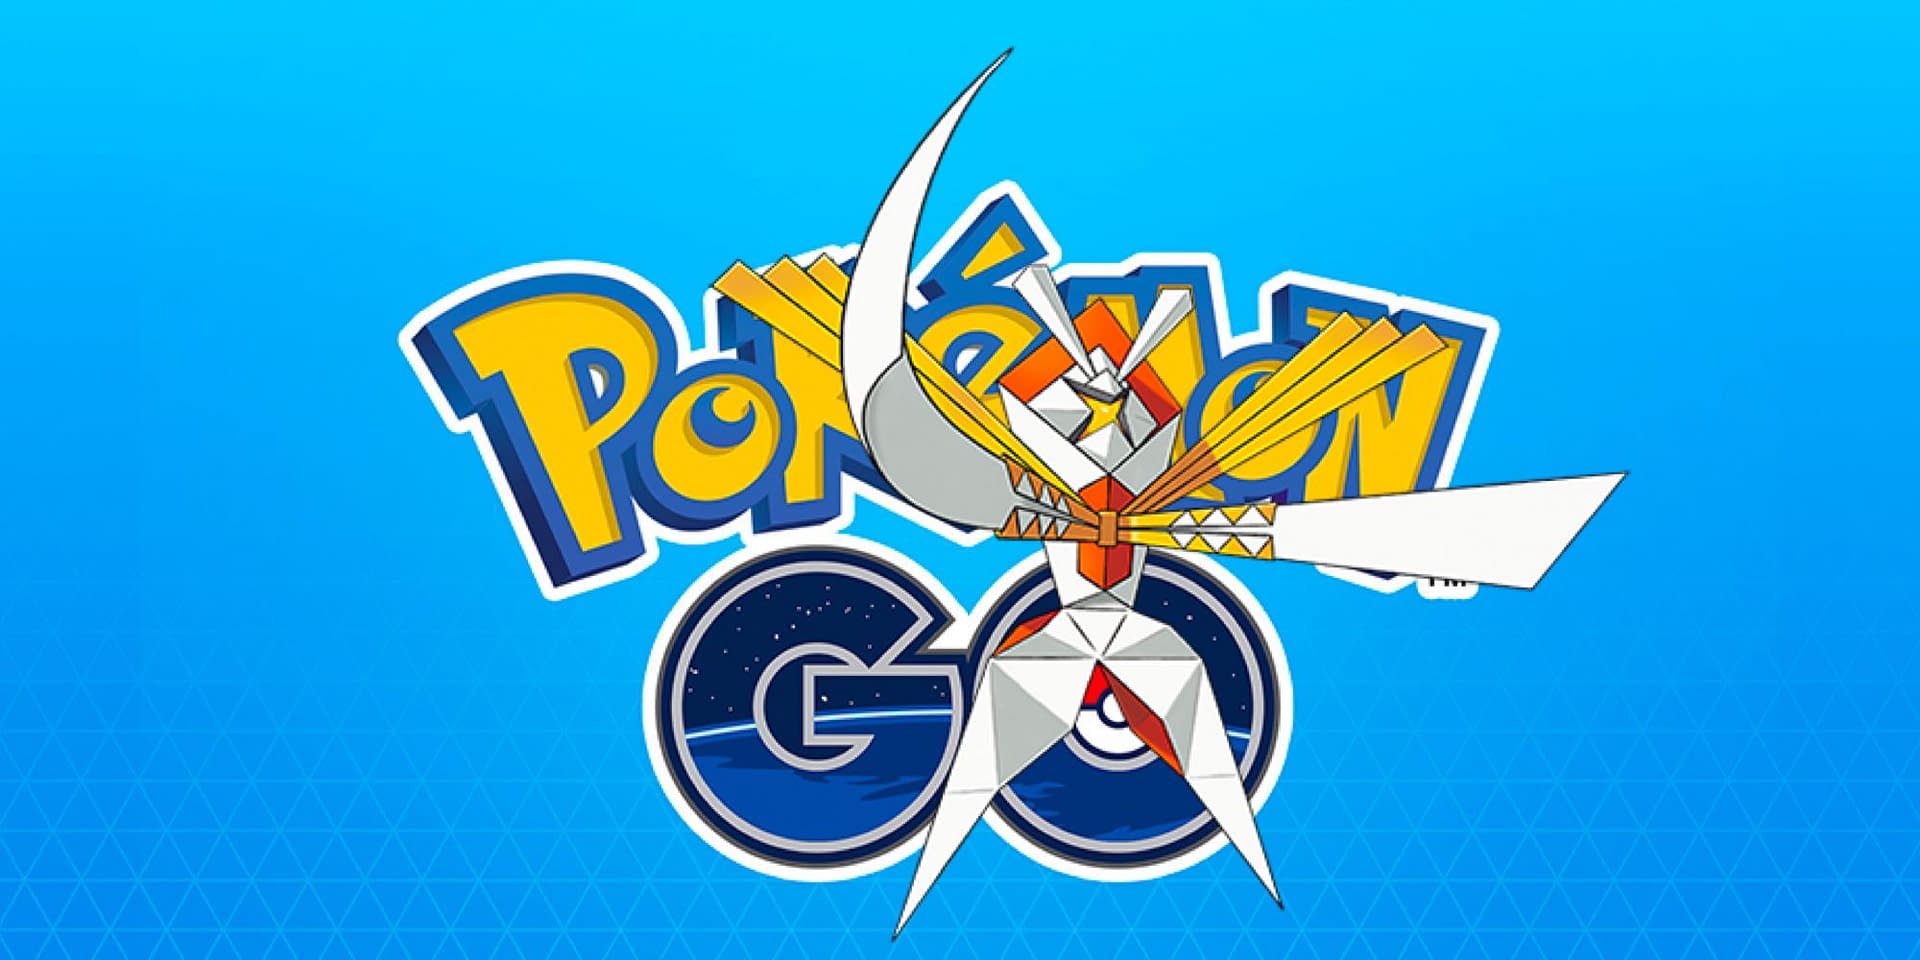 Can Kartana be shiny in Pokémon GO? - Pro Game Guides